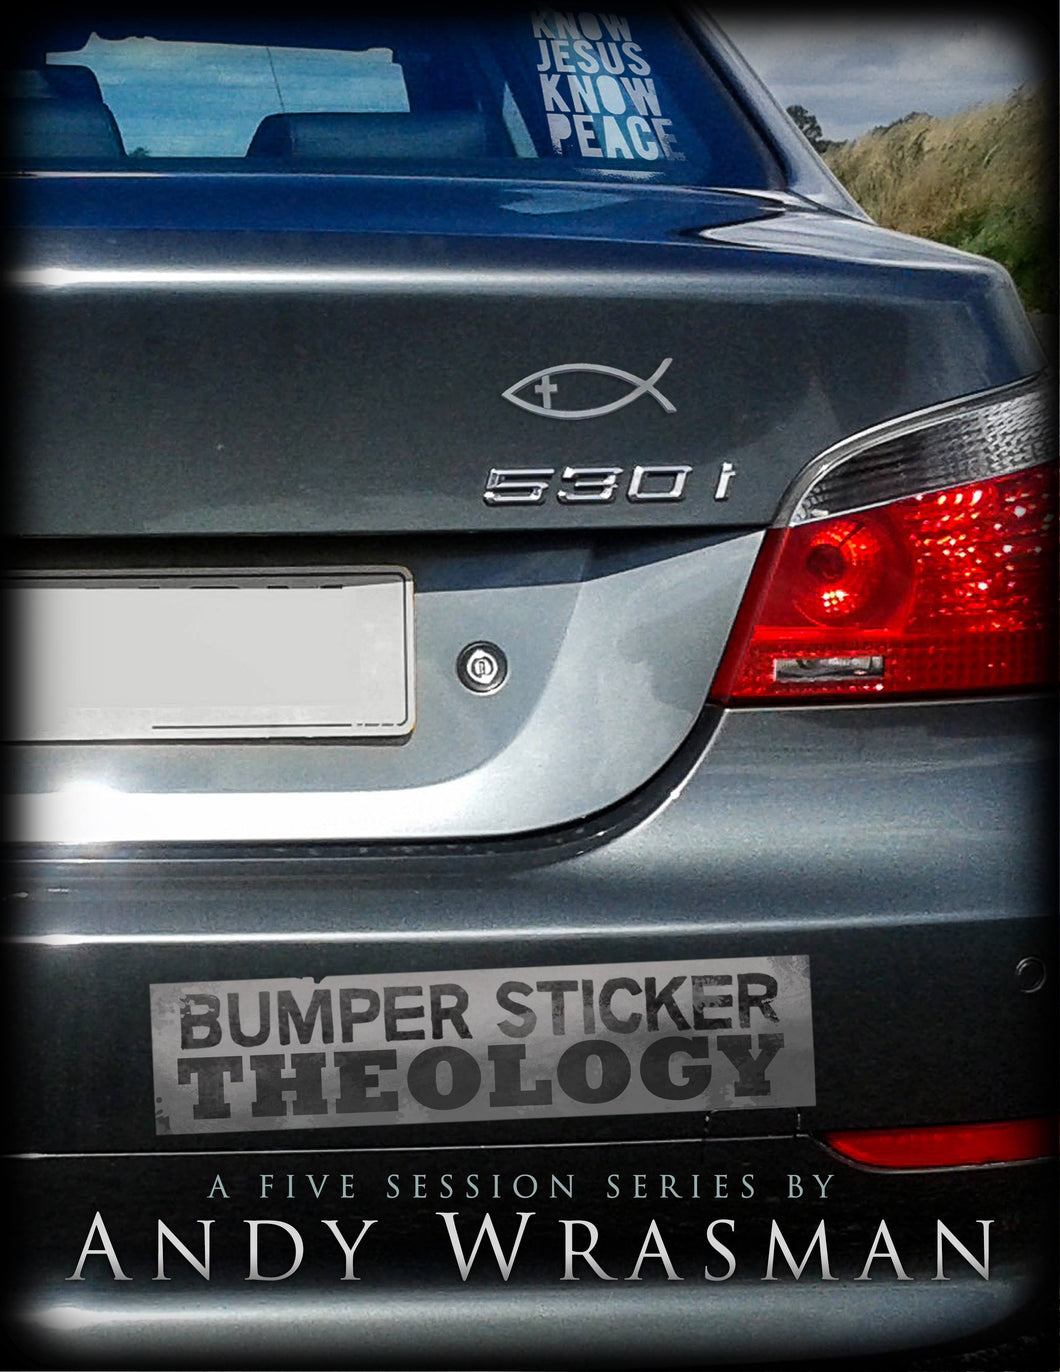 Bumper Sticker Theology (A Five Session Series)